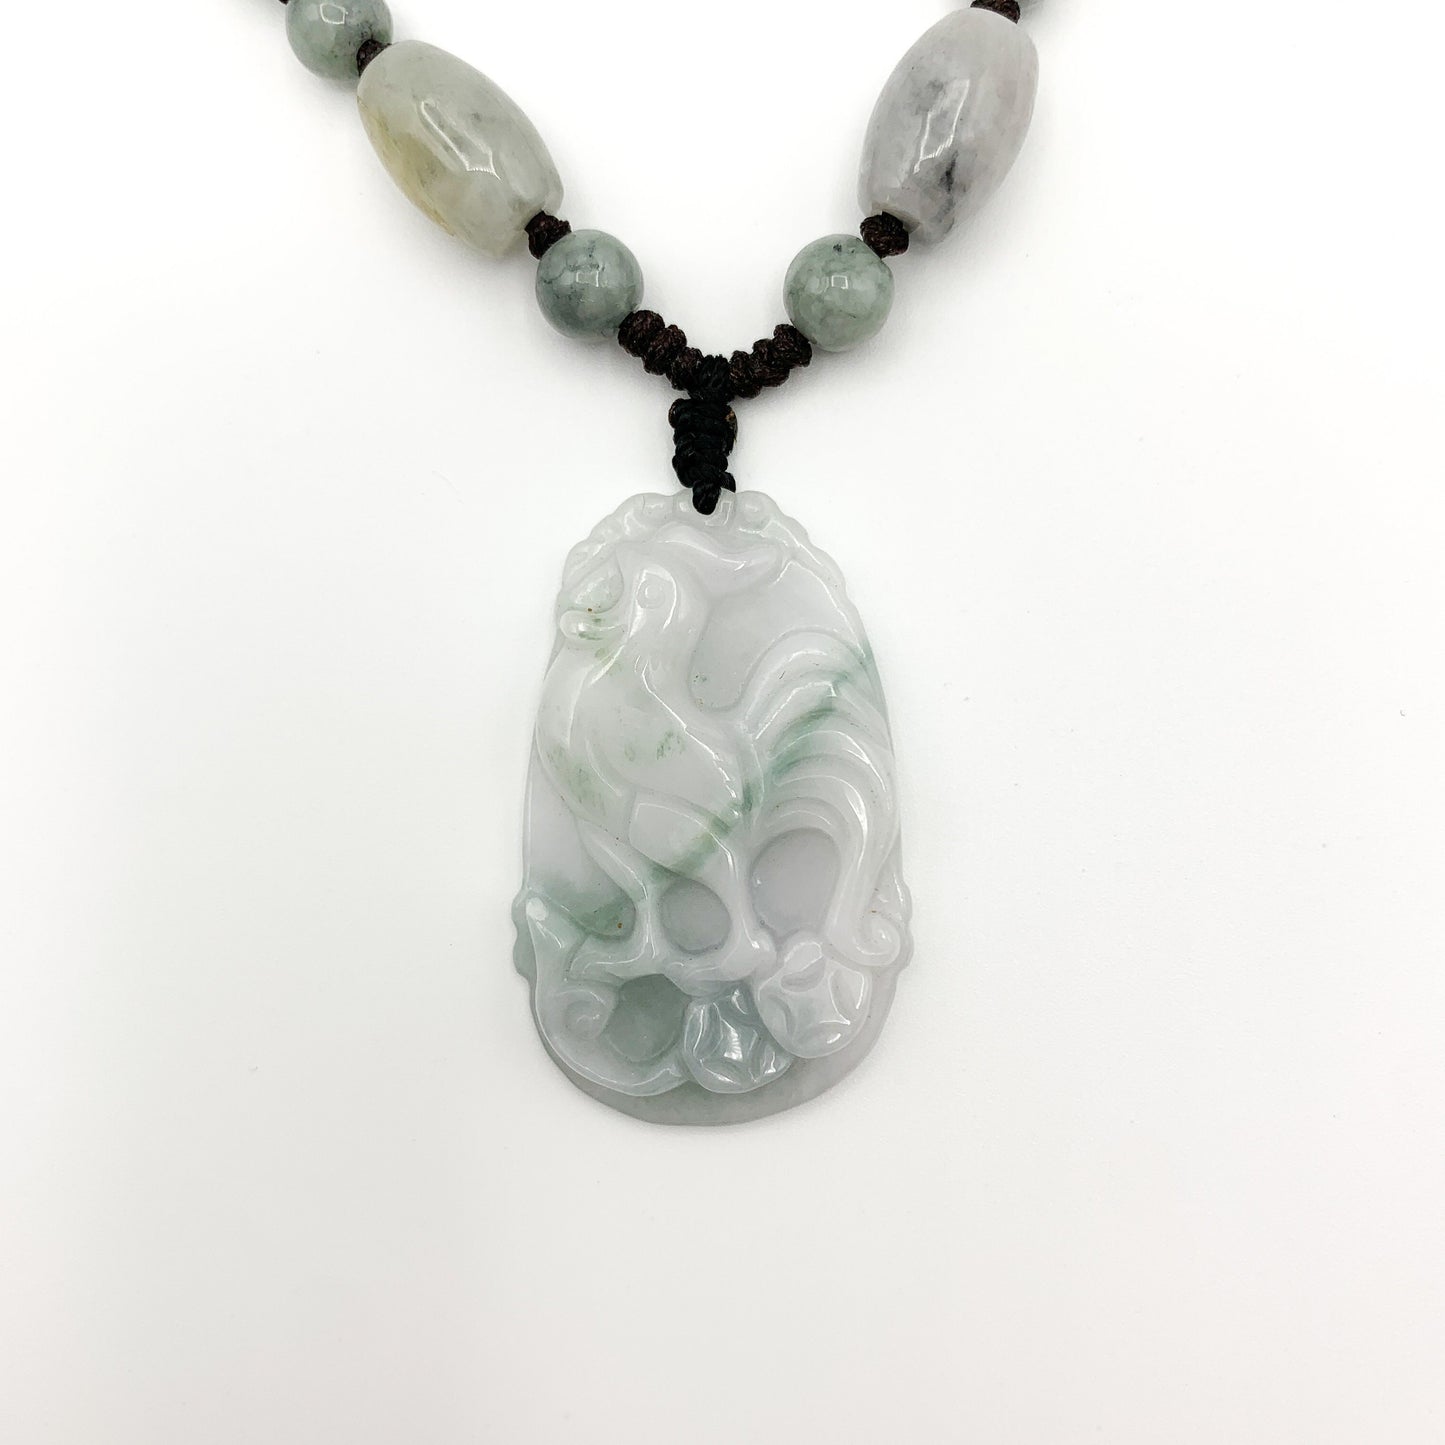 Jadeite Jade Rooster Chicken Chinese Zodiac Carved Rustic Pendant Necklace, YW-0321-1645917332 - AriaDesignCollection